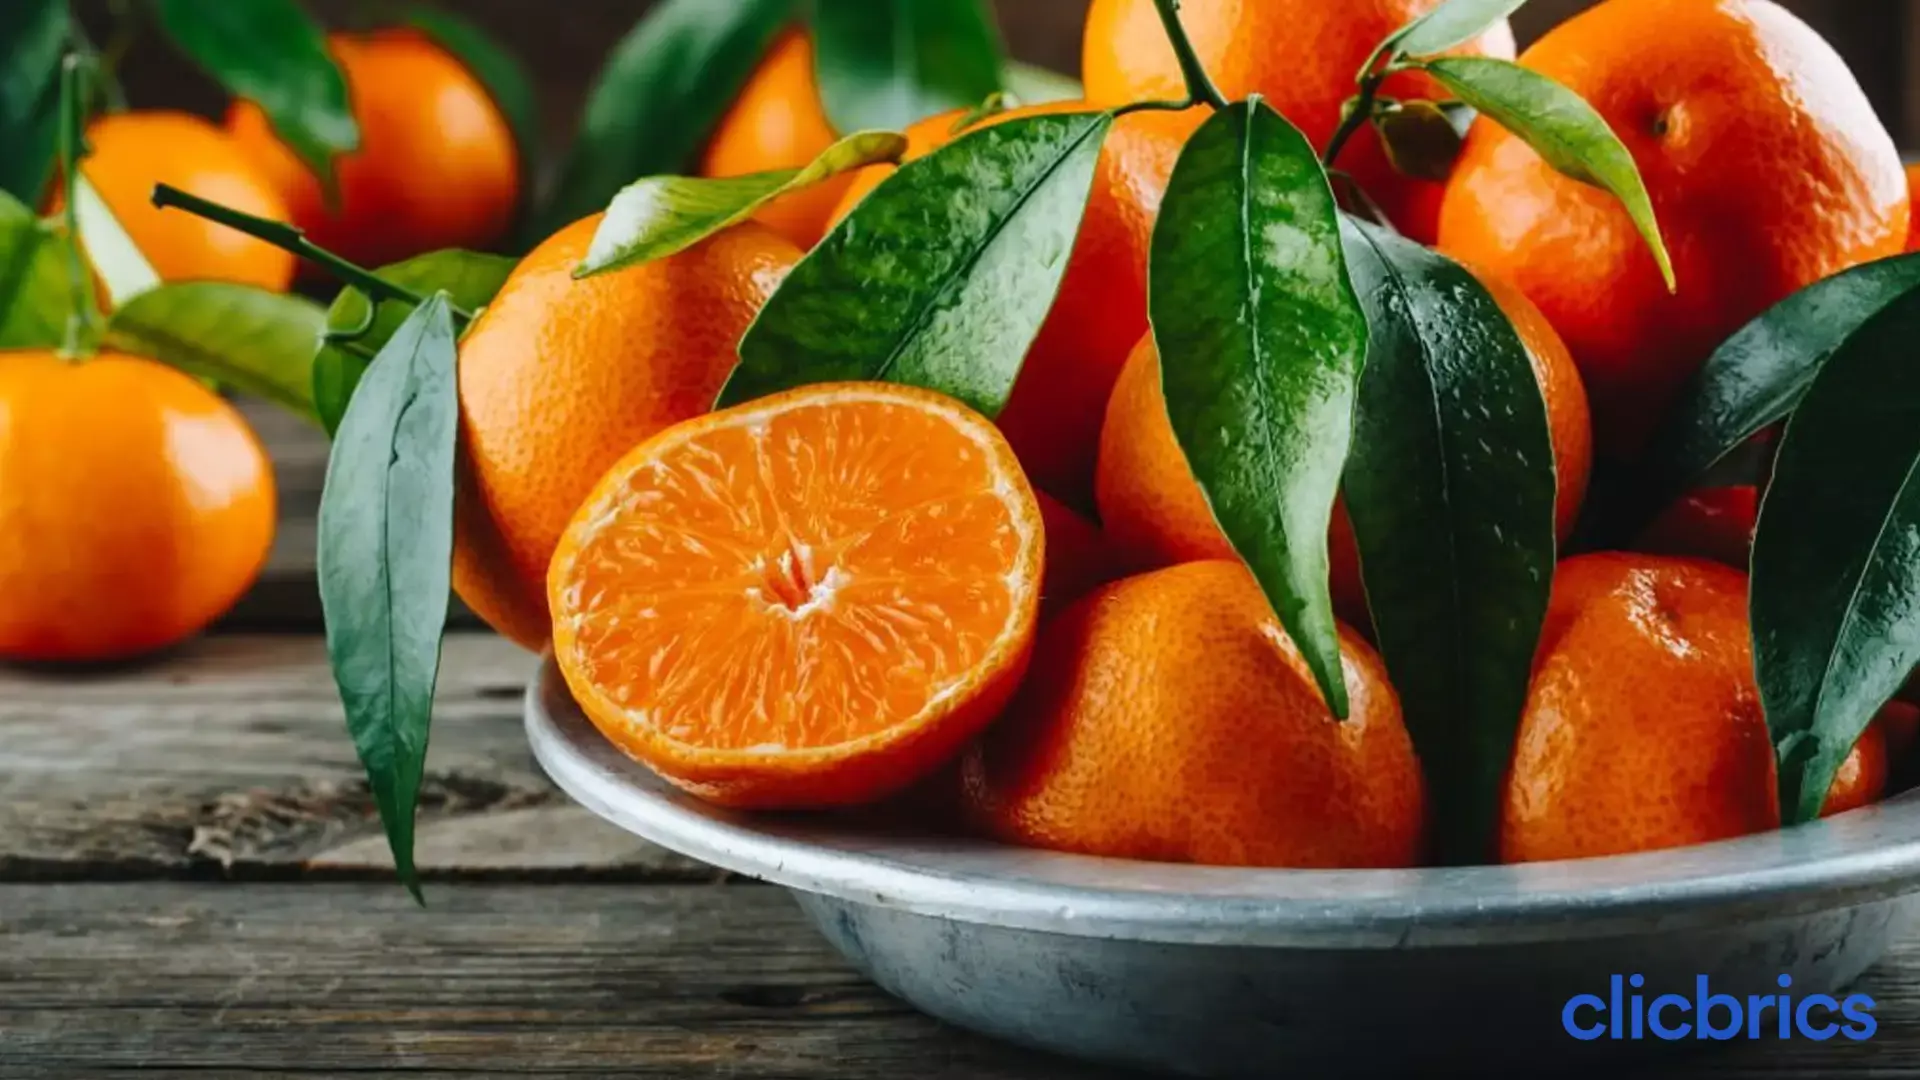 Keep a Bowl of Oranges at Your Home